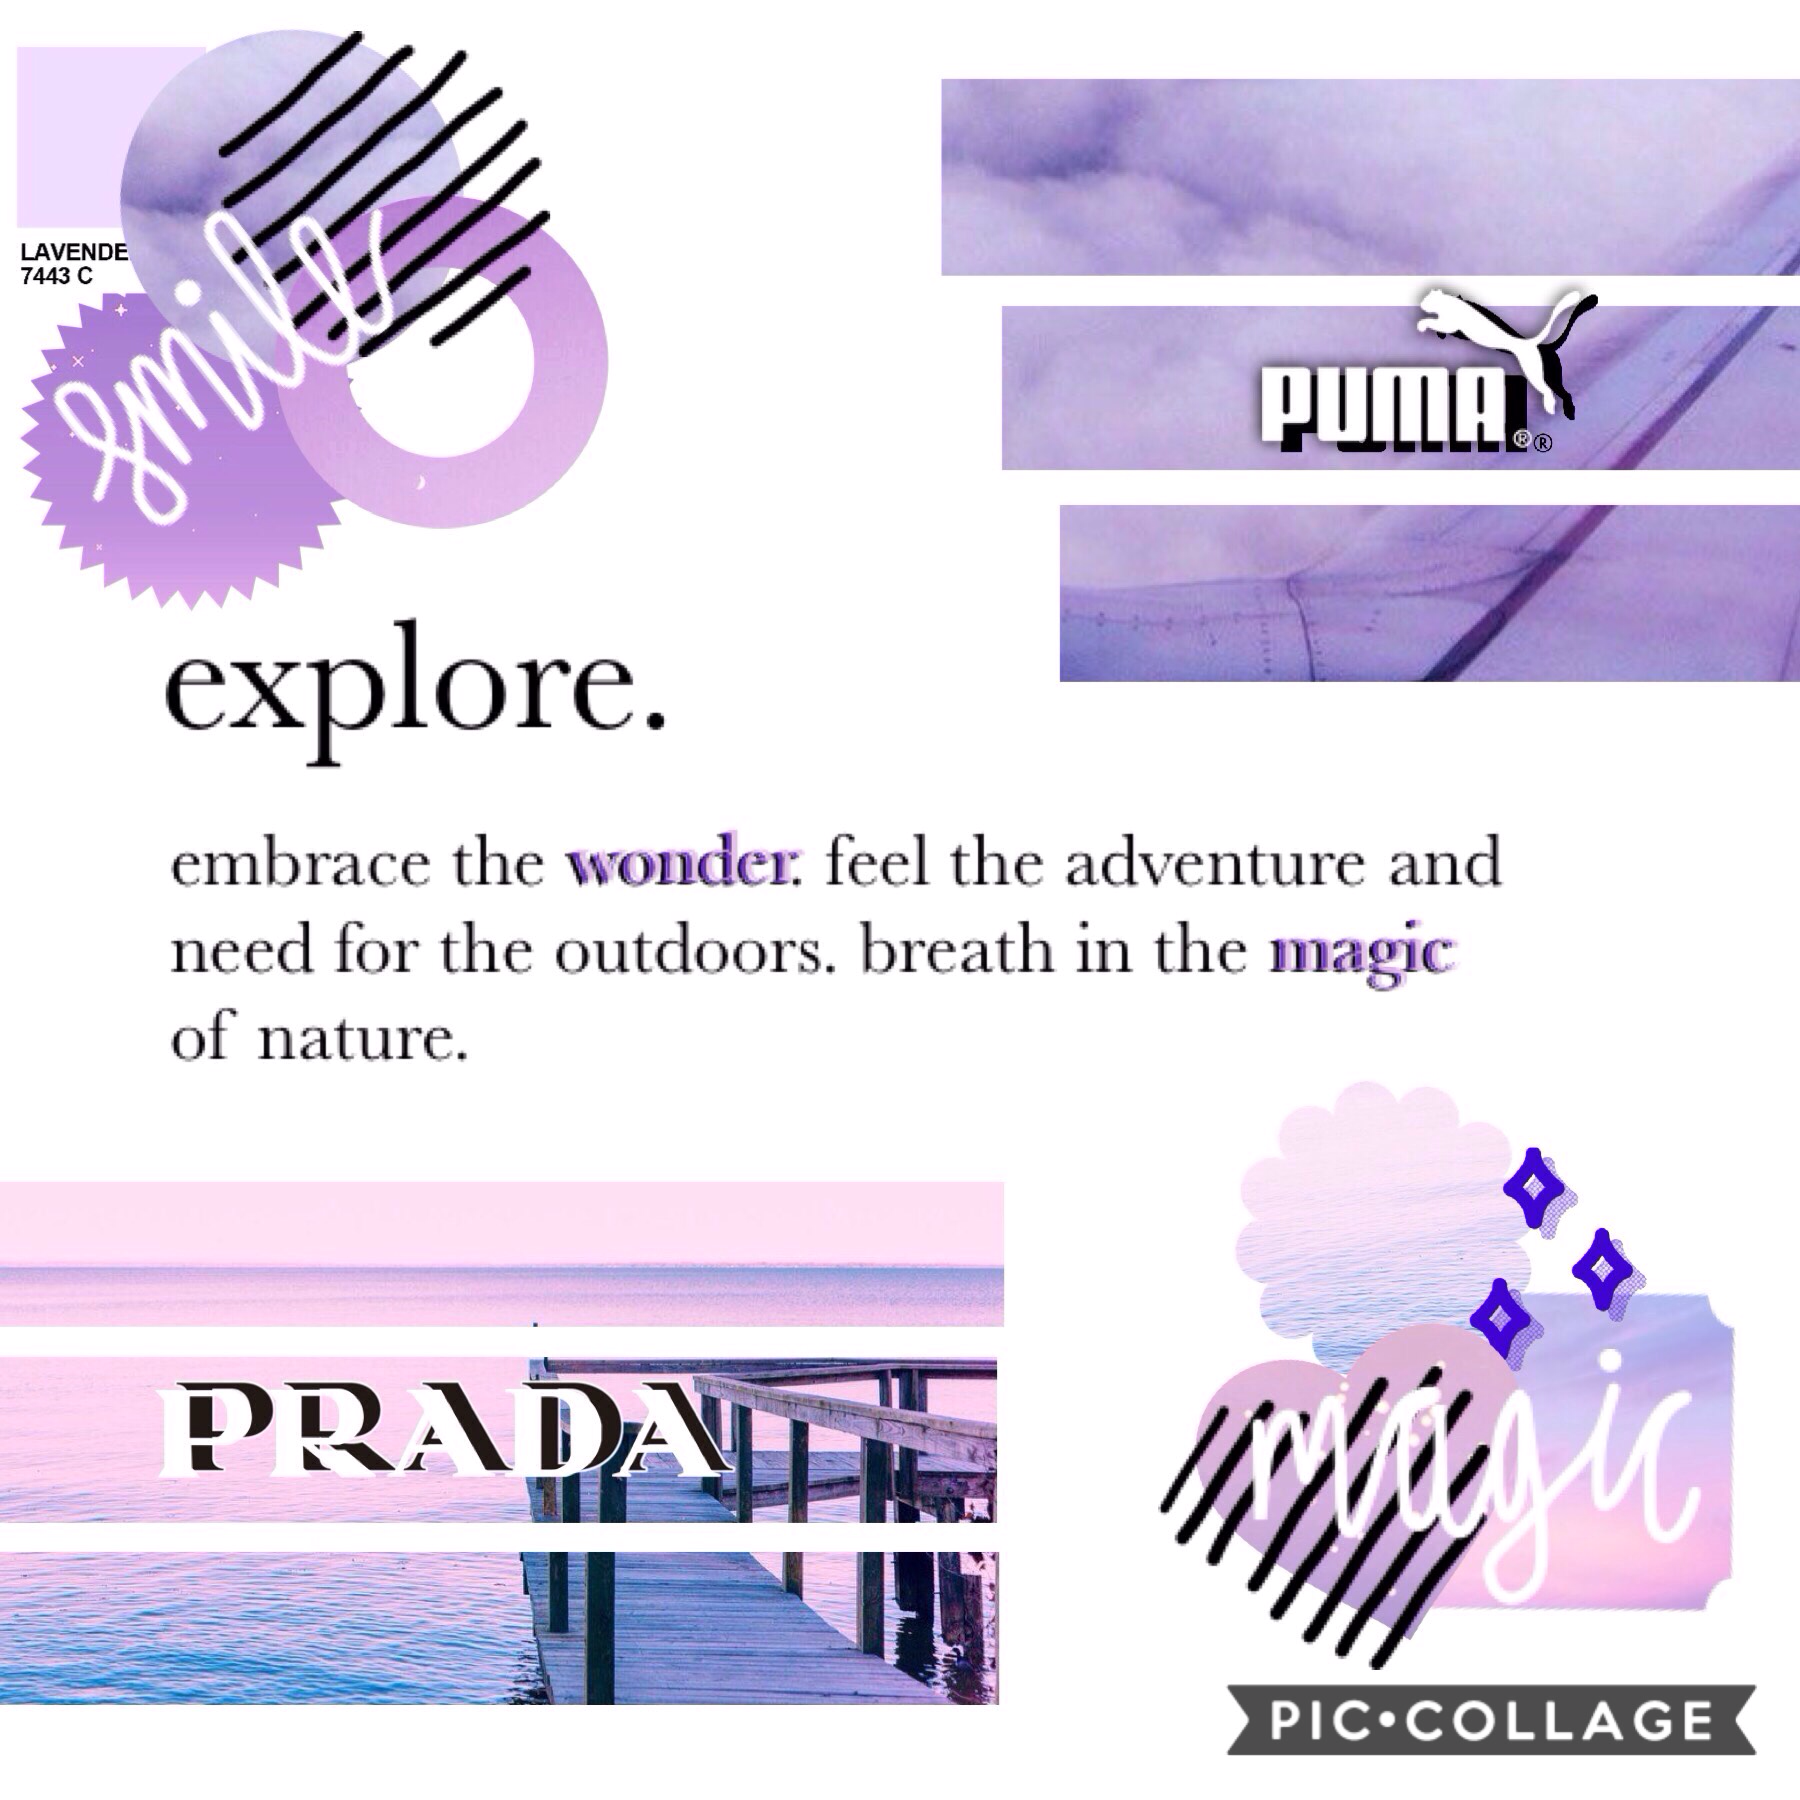 [ explore ] : "embrace the wonder. feel the adventure and need for the outdoors. breath in the magic of nature." 🌲🔮🦄 [ 8-9-19 ]
entry to @love_yourselfx3's mega collab! quote by me! the theme of this was lavender and purple skies 🌌🔮 have a great week and 